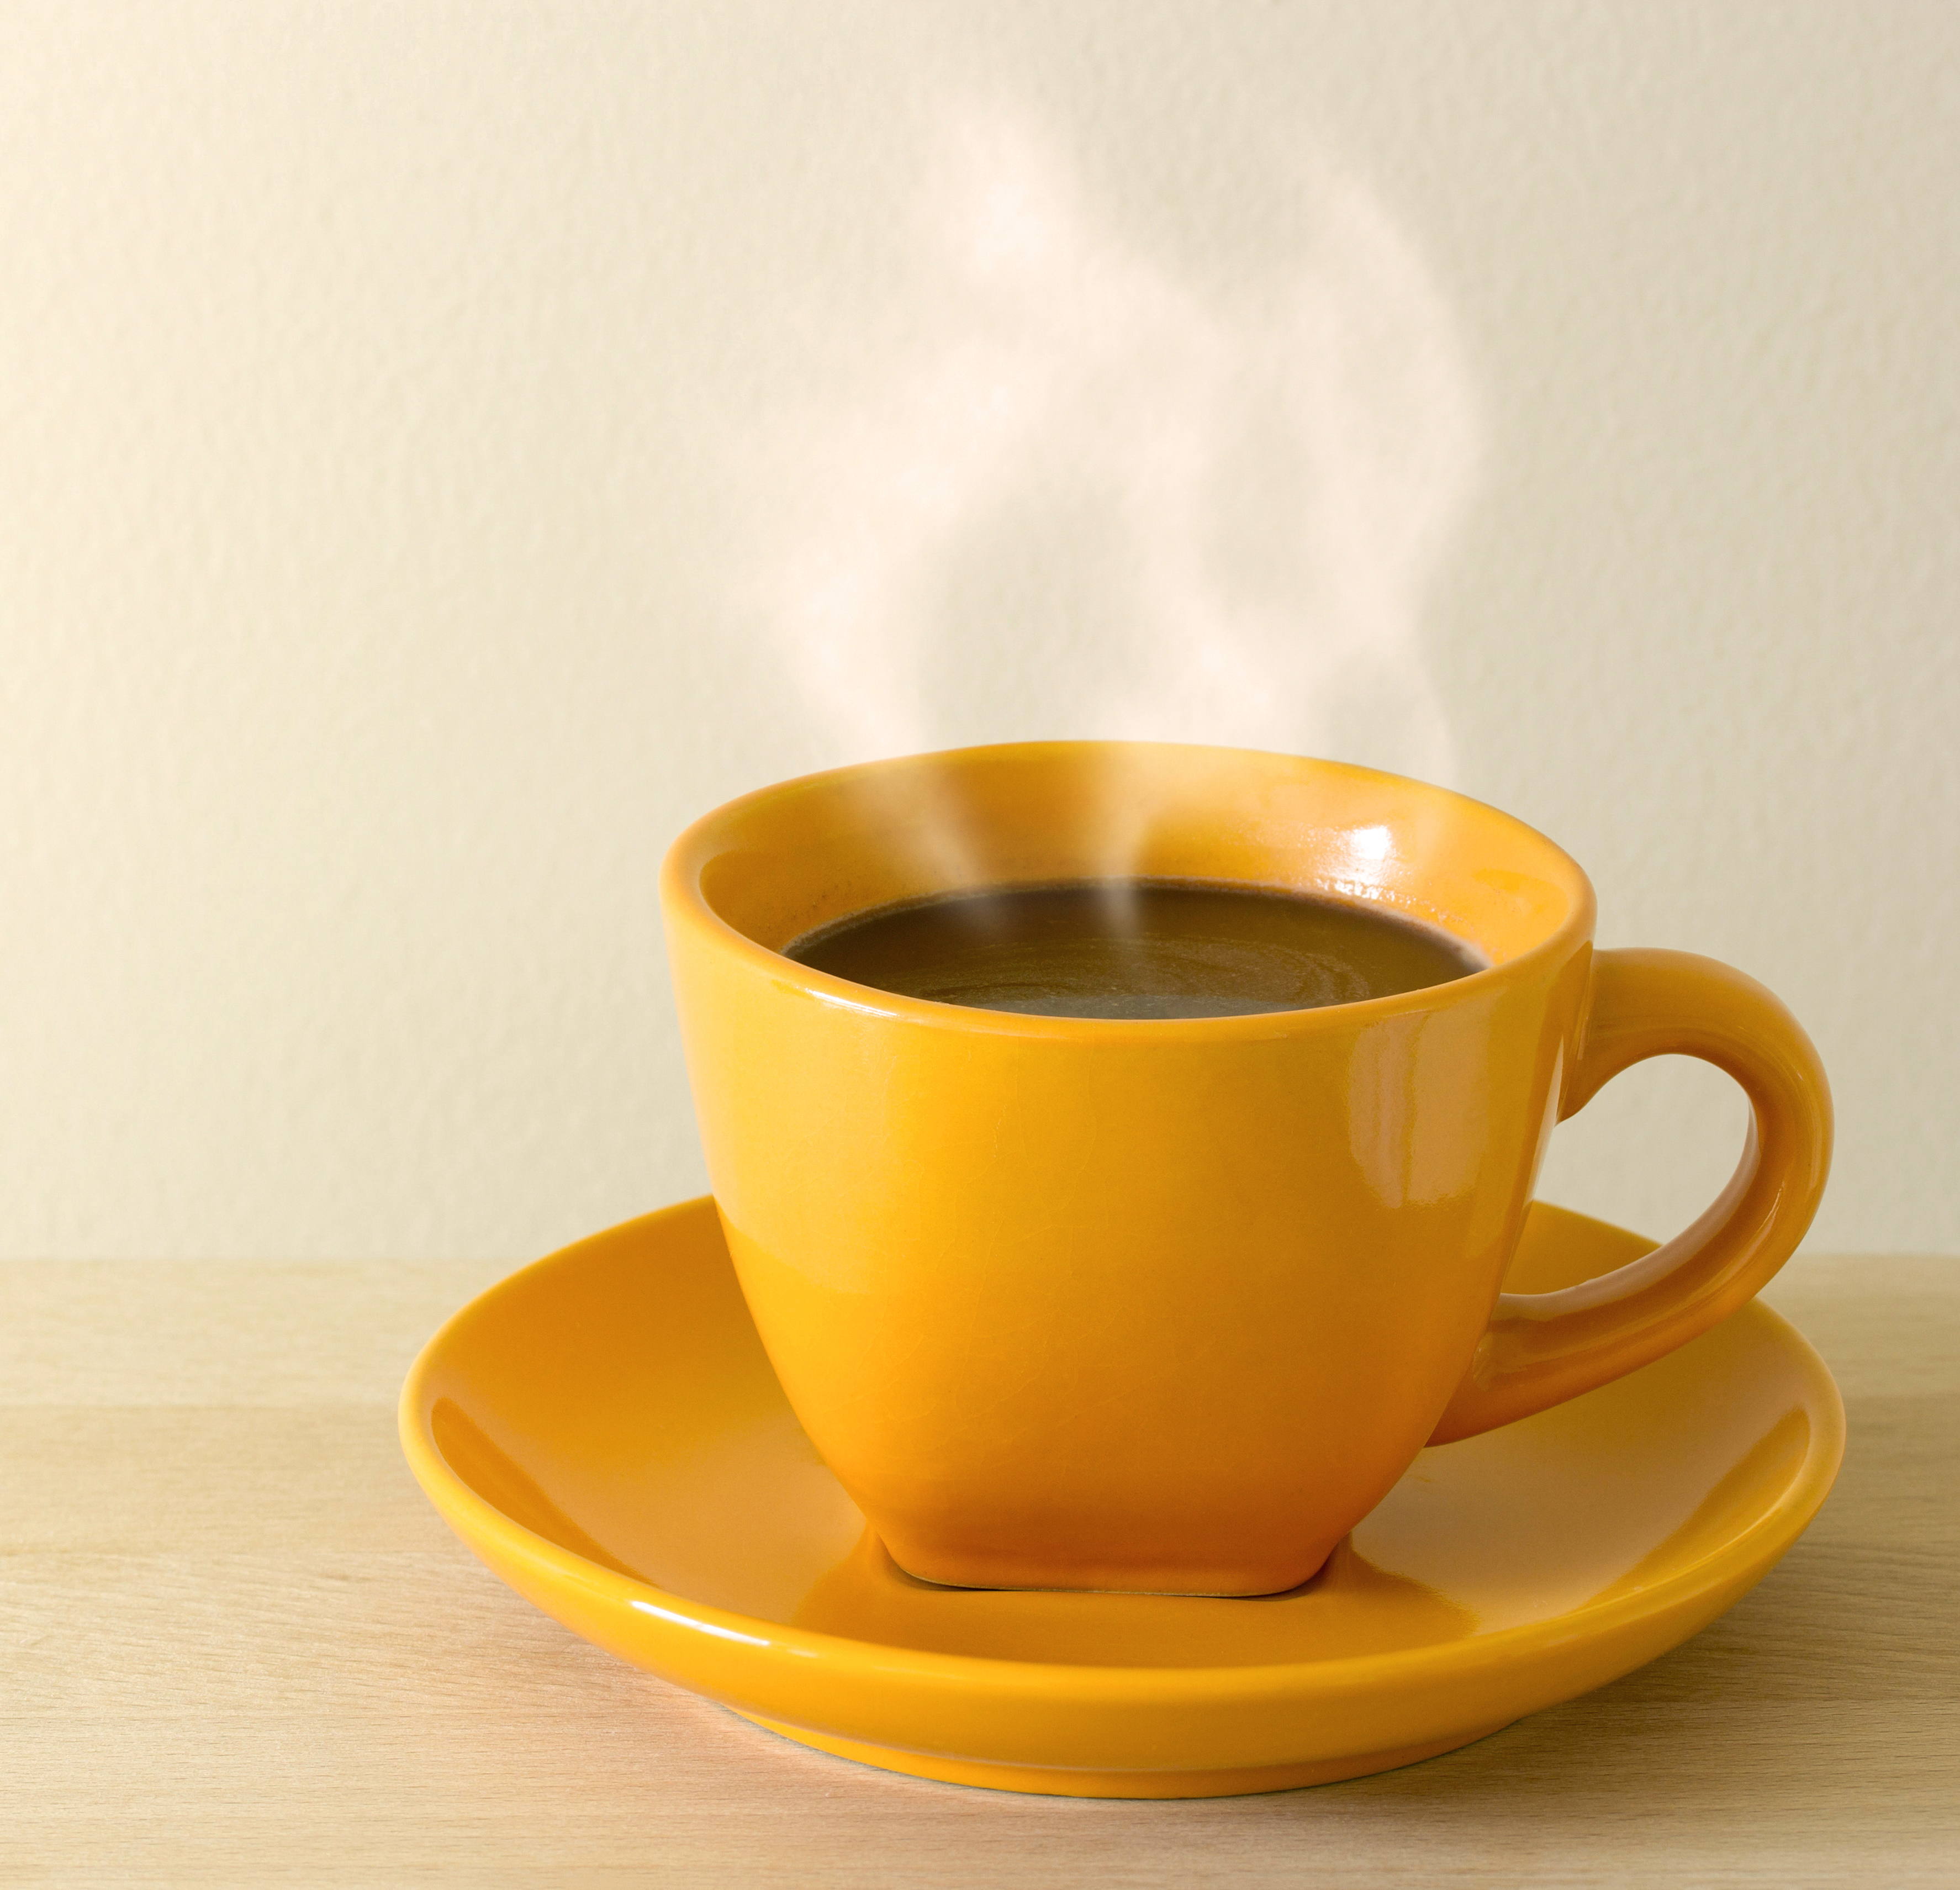 A yellow cup of coffee on a yellow saucer